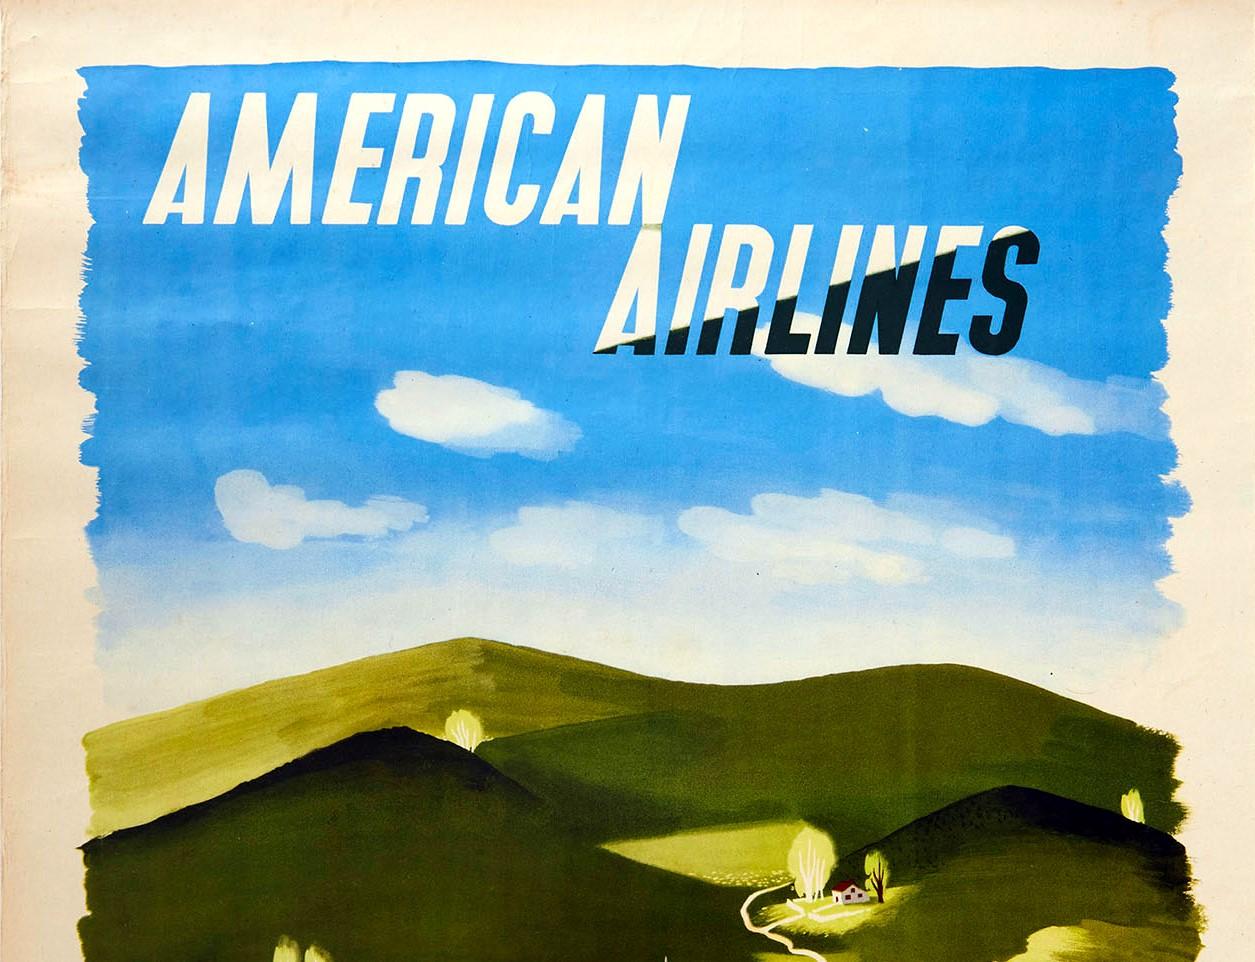 Original vintage travel advertising poster - American Airlines to New England - designed by one of the most renowned poster artists of the 20th century Edward McKnight Kauffer (1890-1954) featuring a scenic countryside view in shades of green and